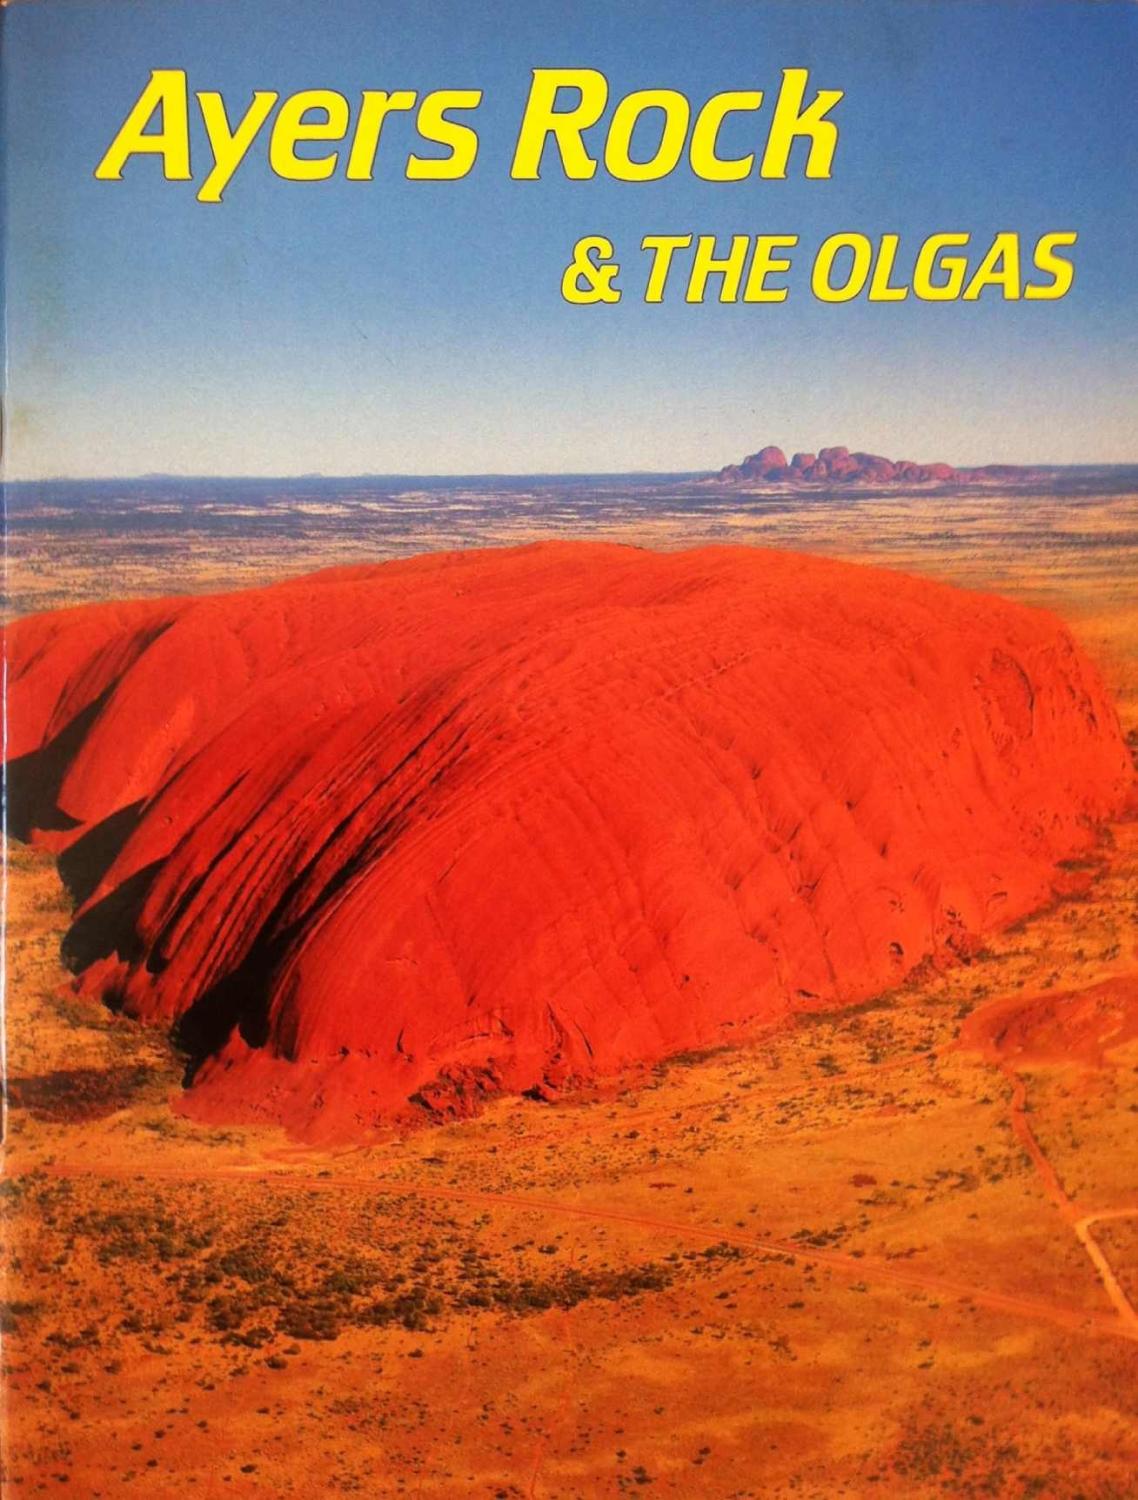 AYERS ROCK AND THE OLGAS - Peter King (text)